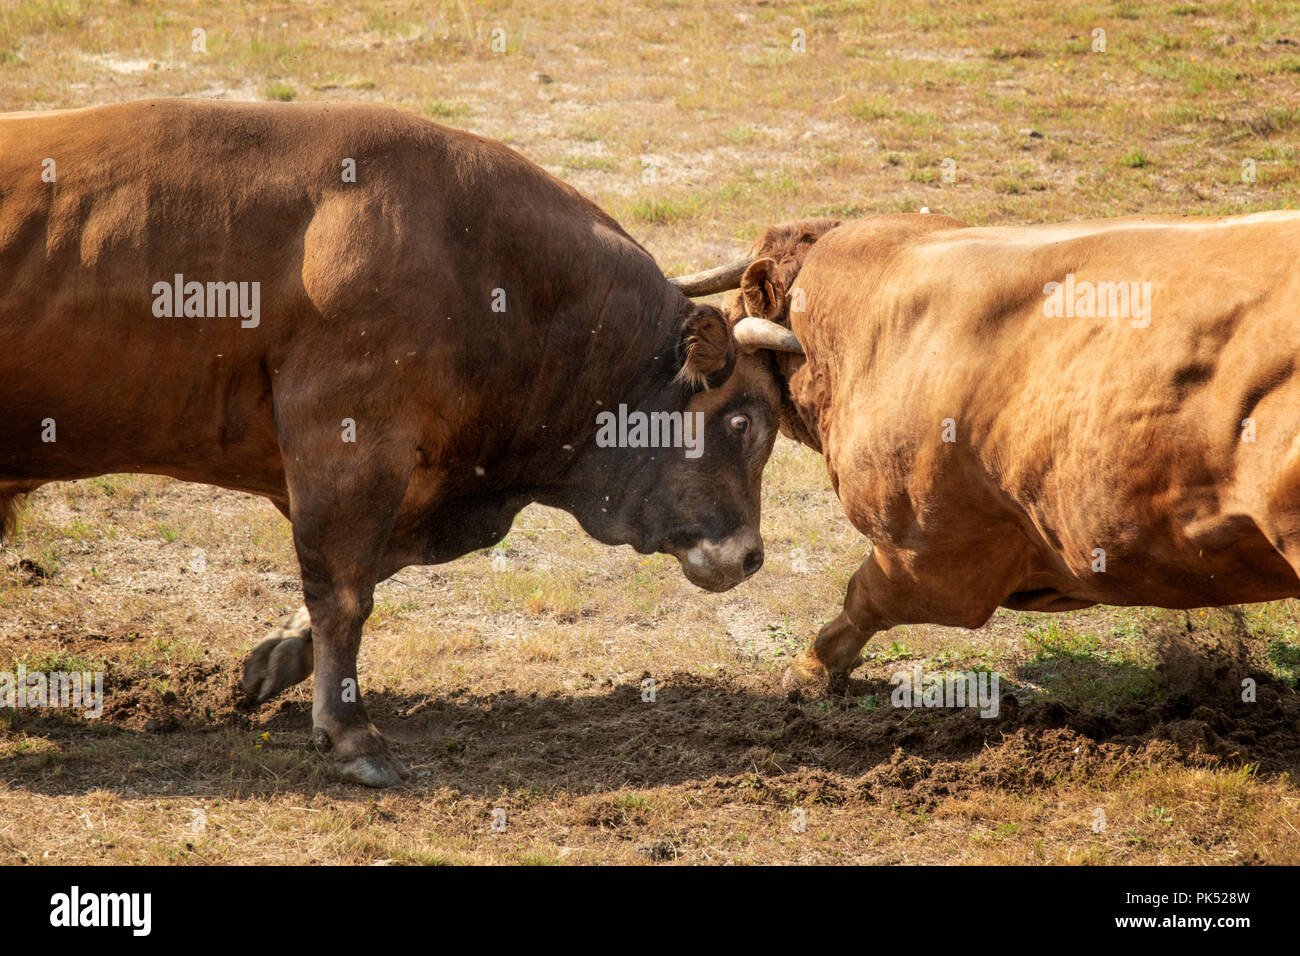 Traditional bullfighting (chega de bois) between the best bulls of each village of the northern region of Barroso. Montalegre, Tras os Montes. Portuga Stock Photo